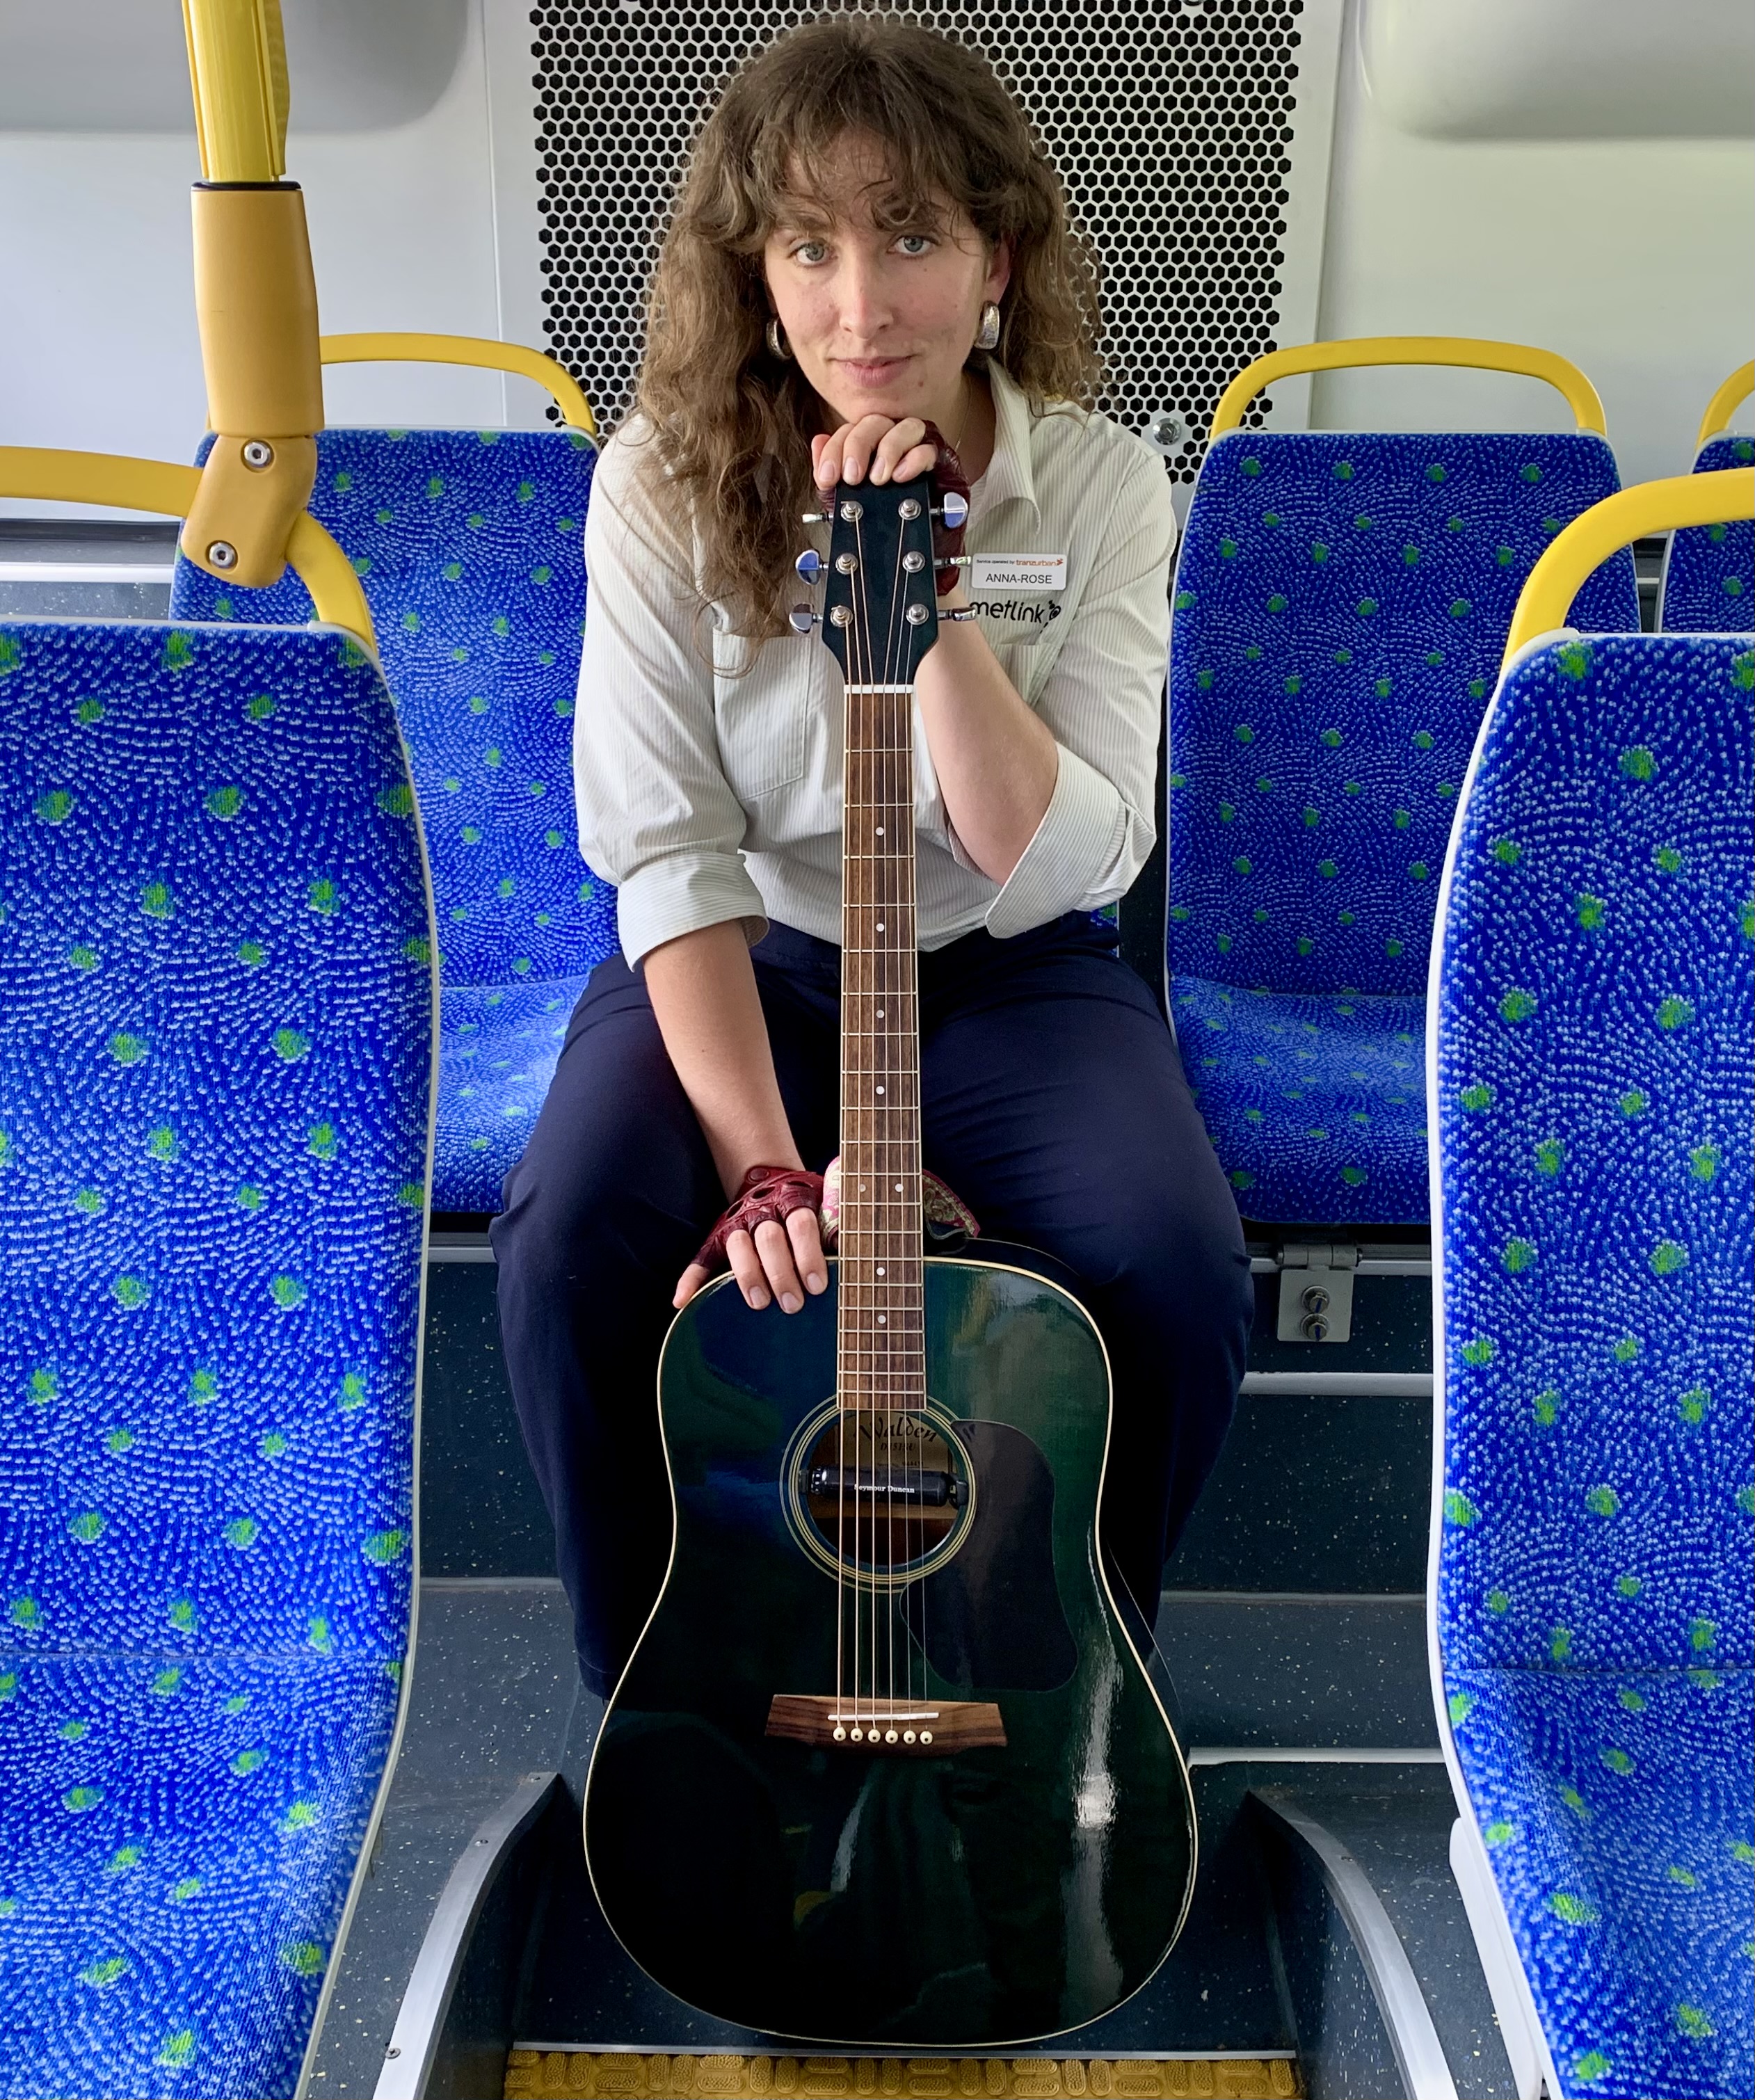 Anna-Rose in the back seat of a bus with her guitar